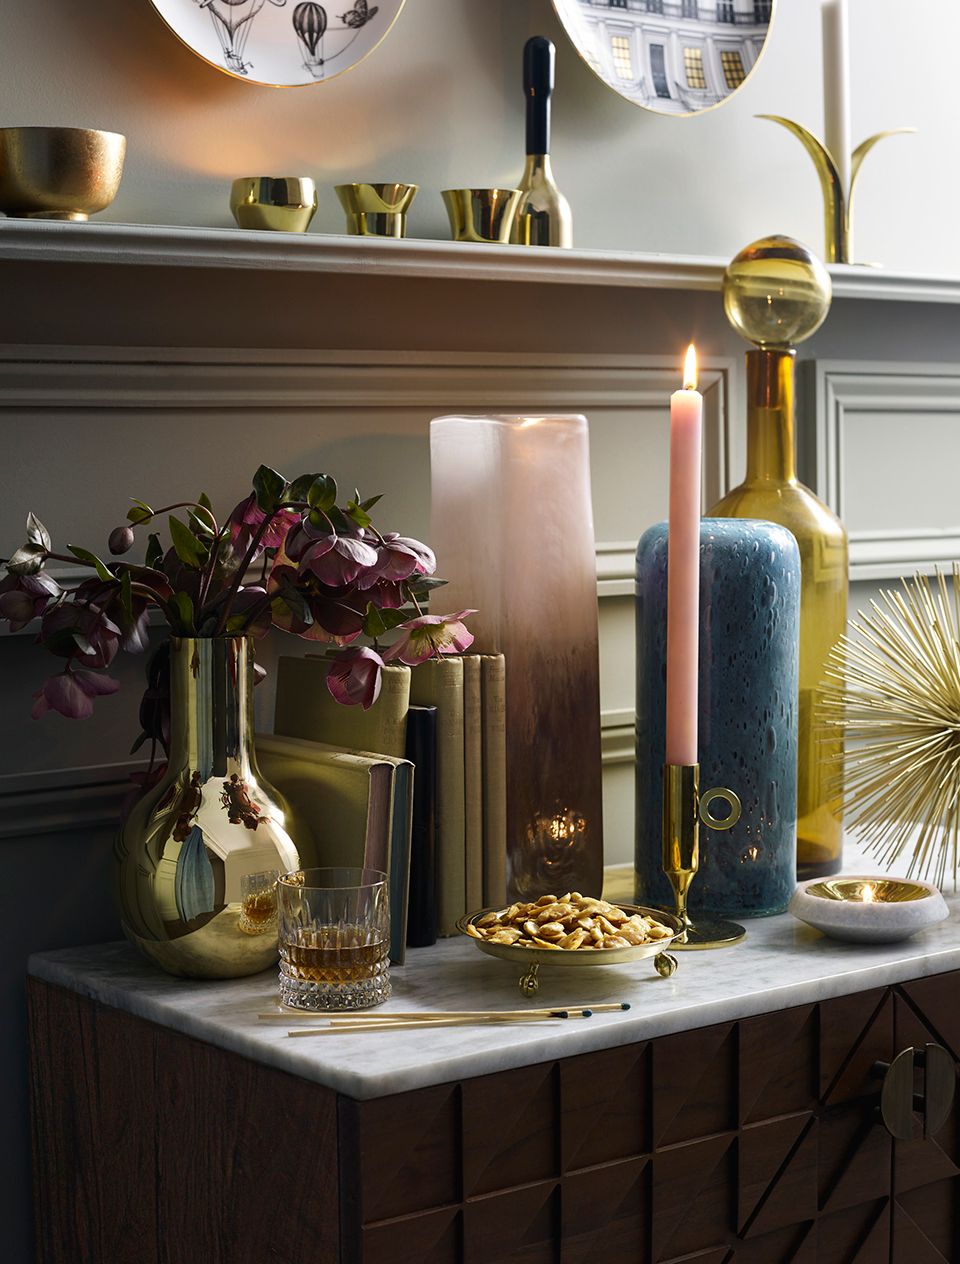 Candles and vases